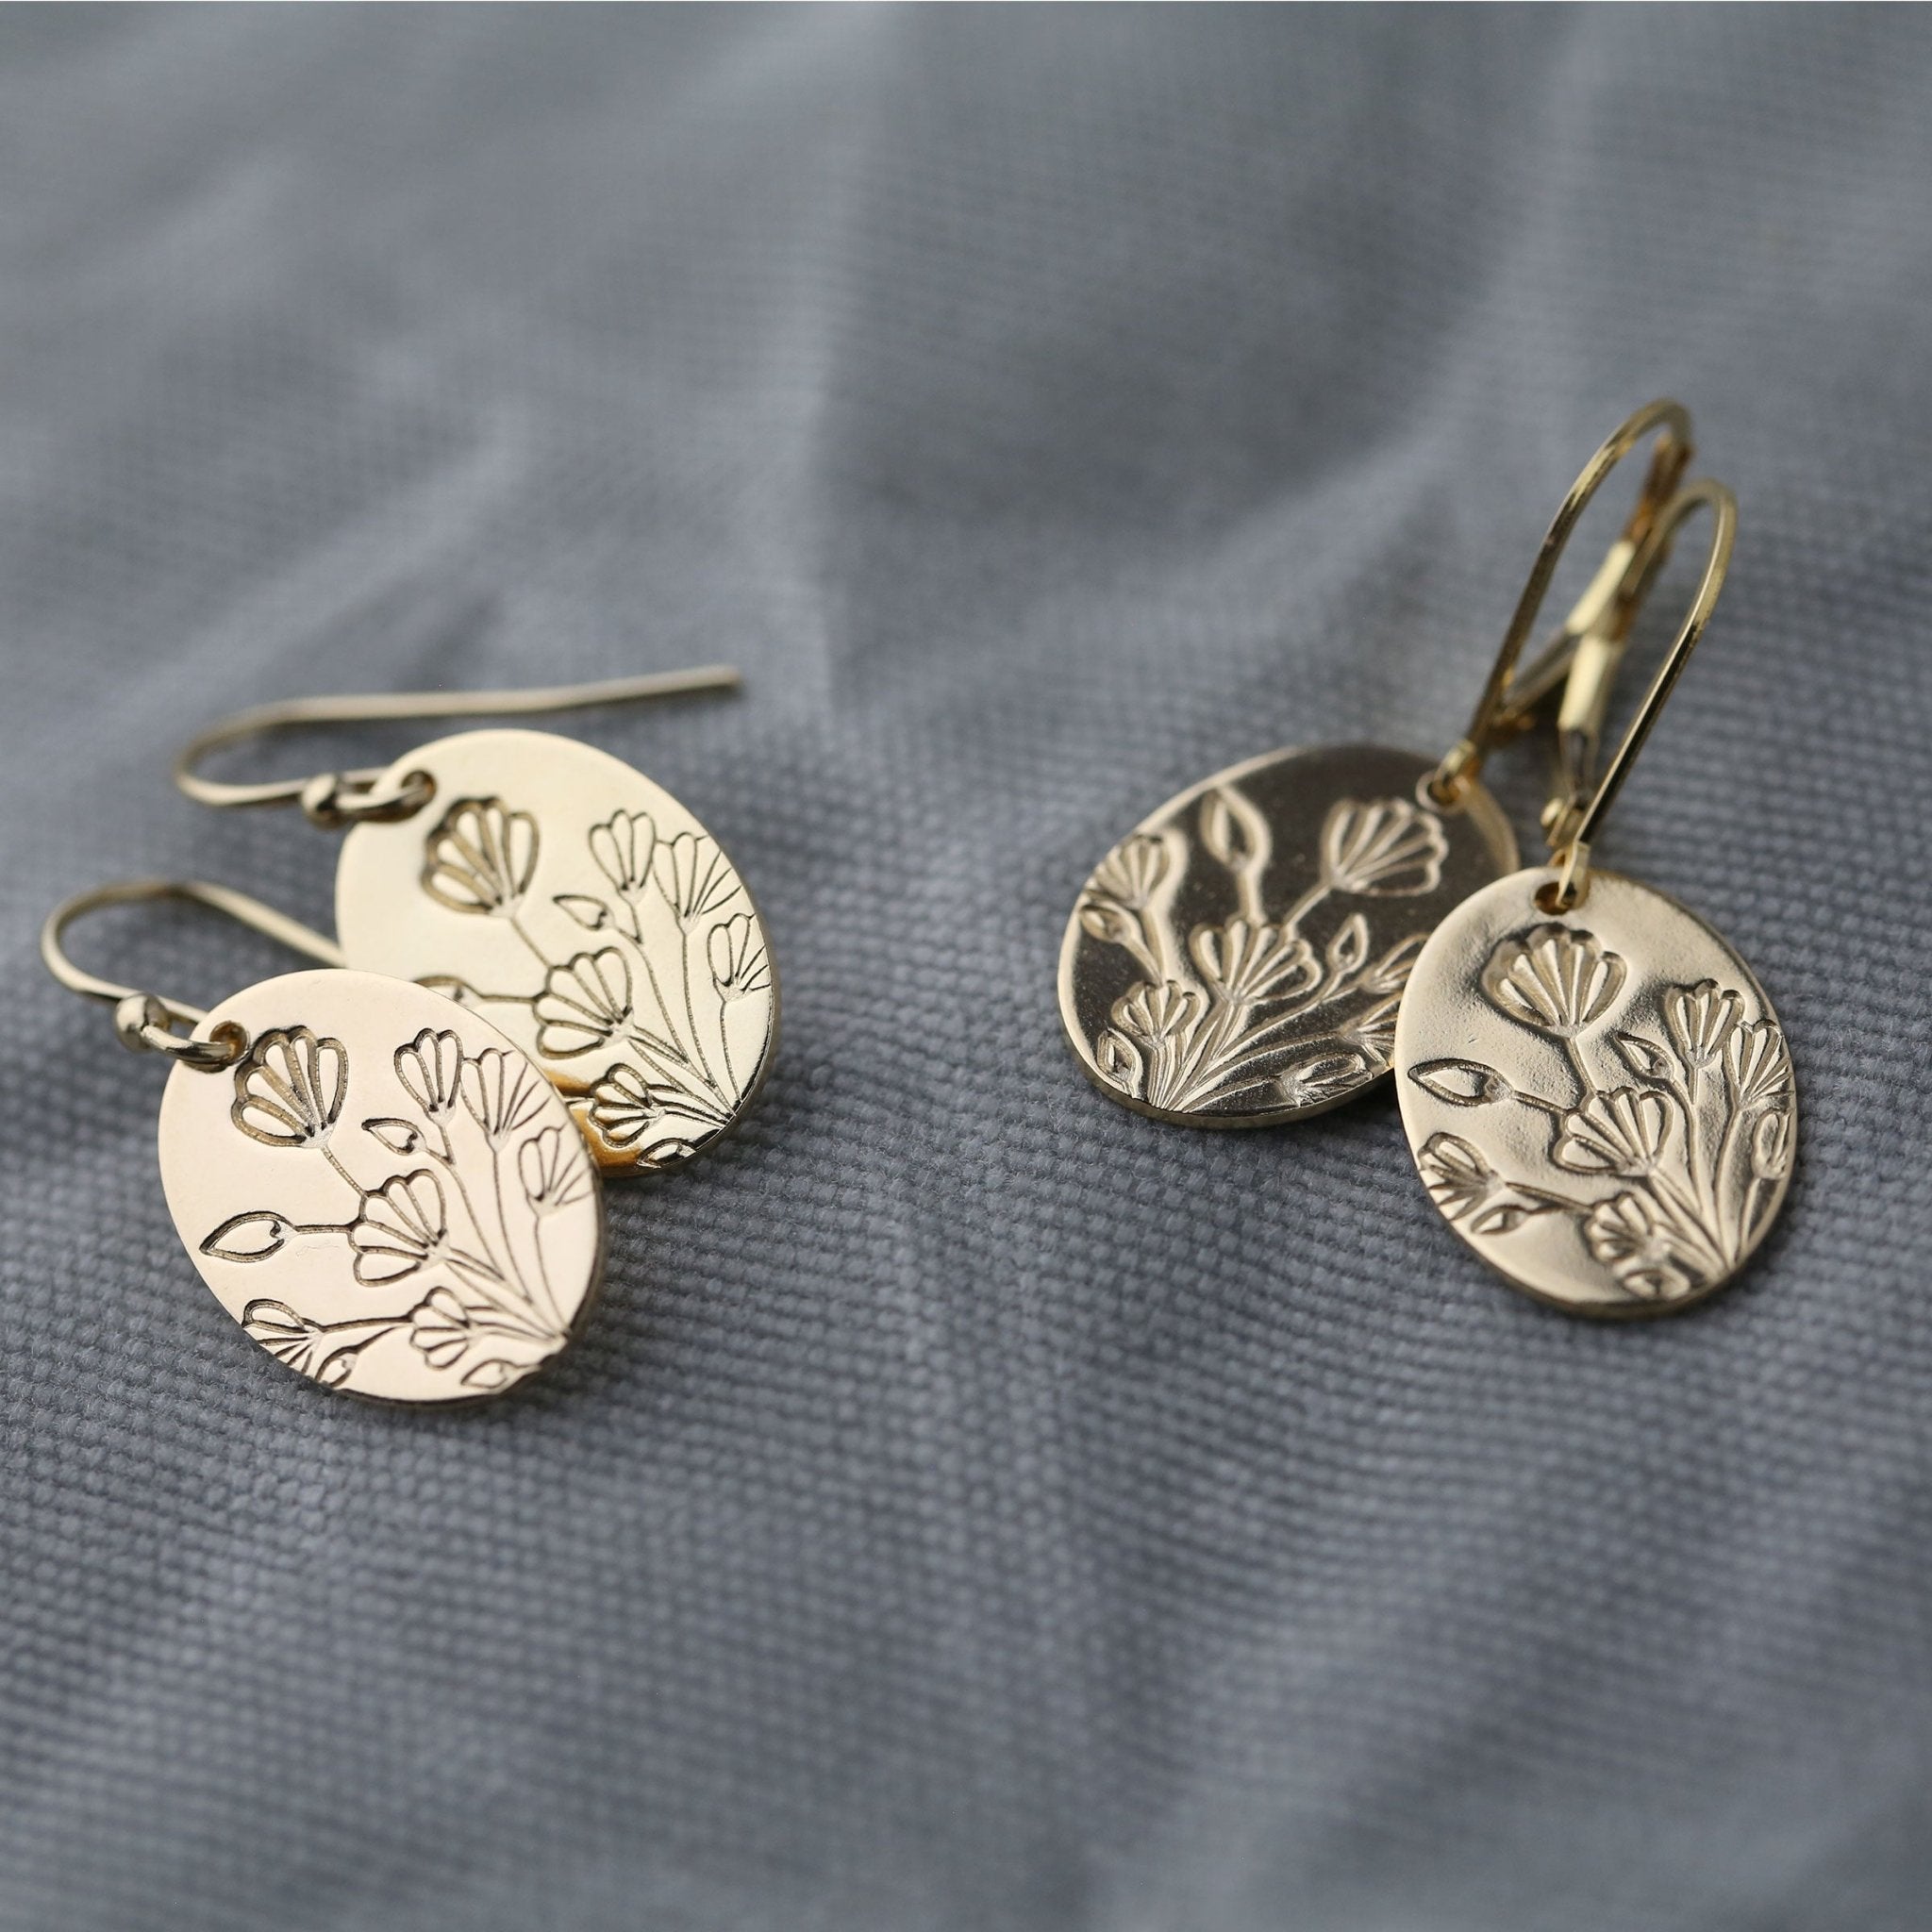 Oval Stamped Floral Earrings